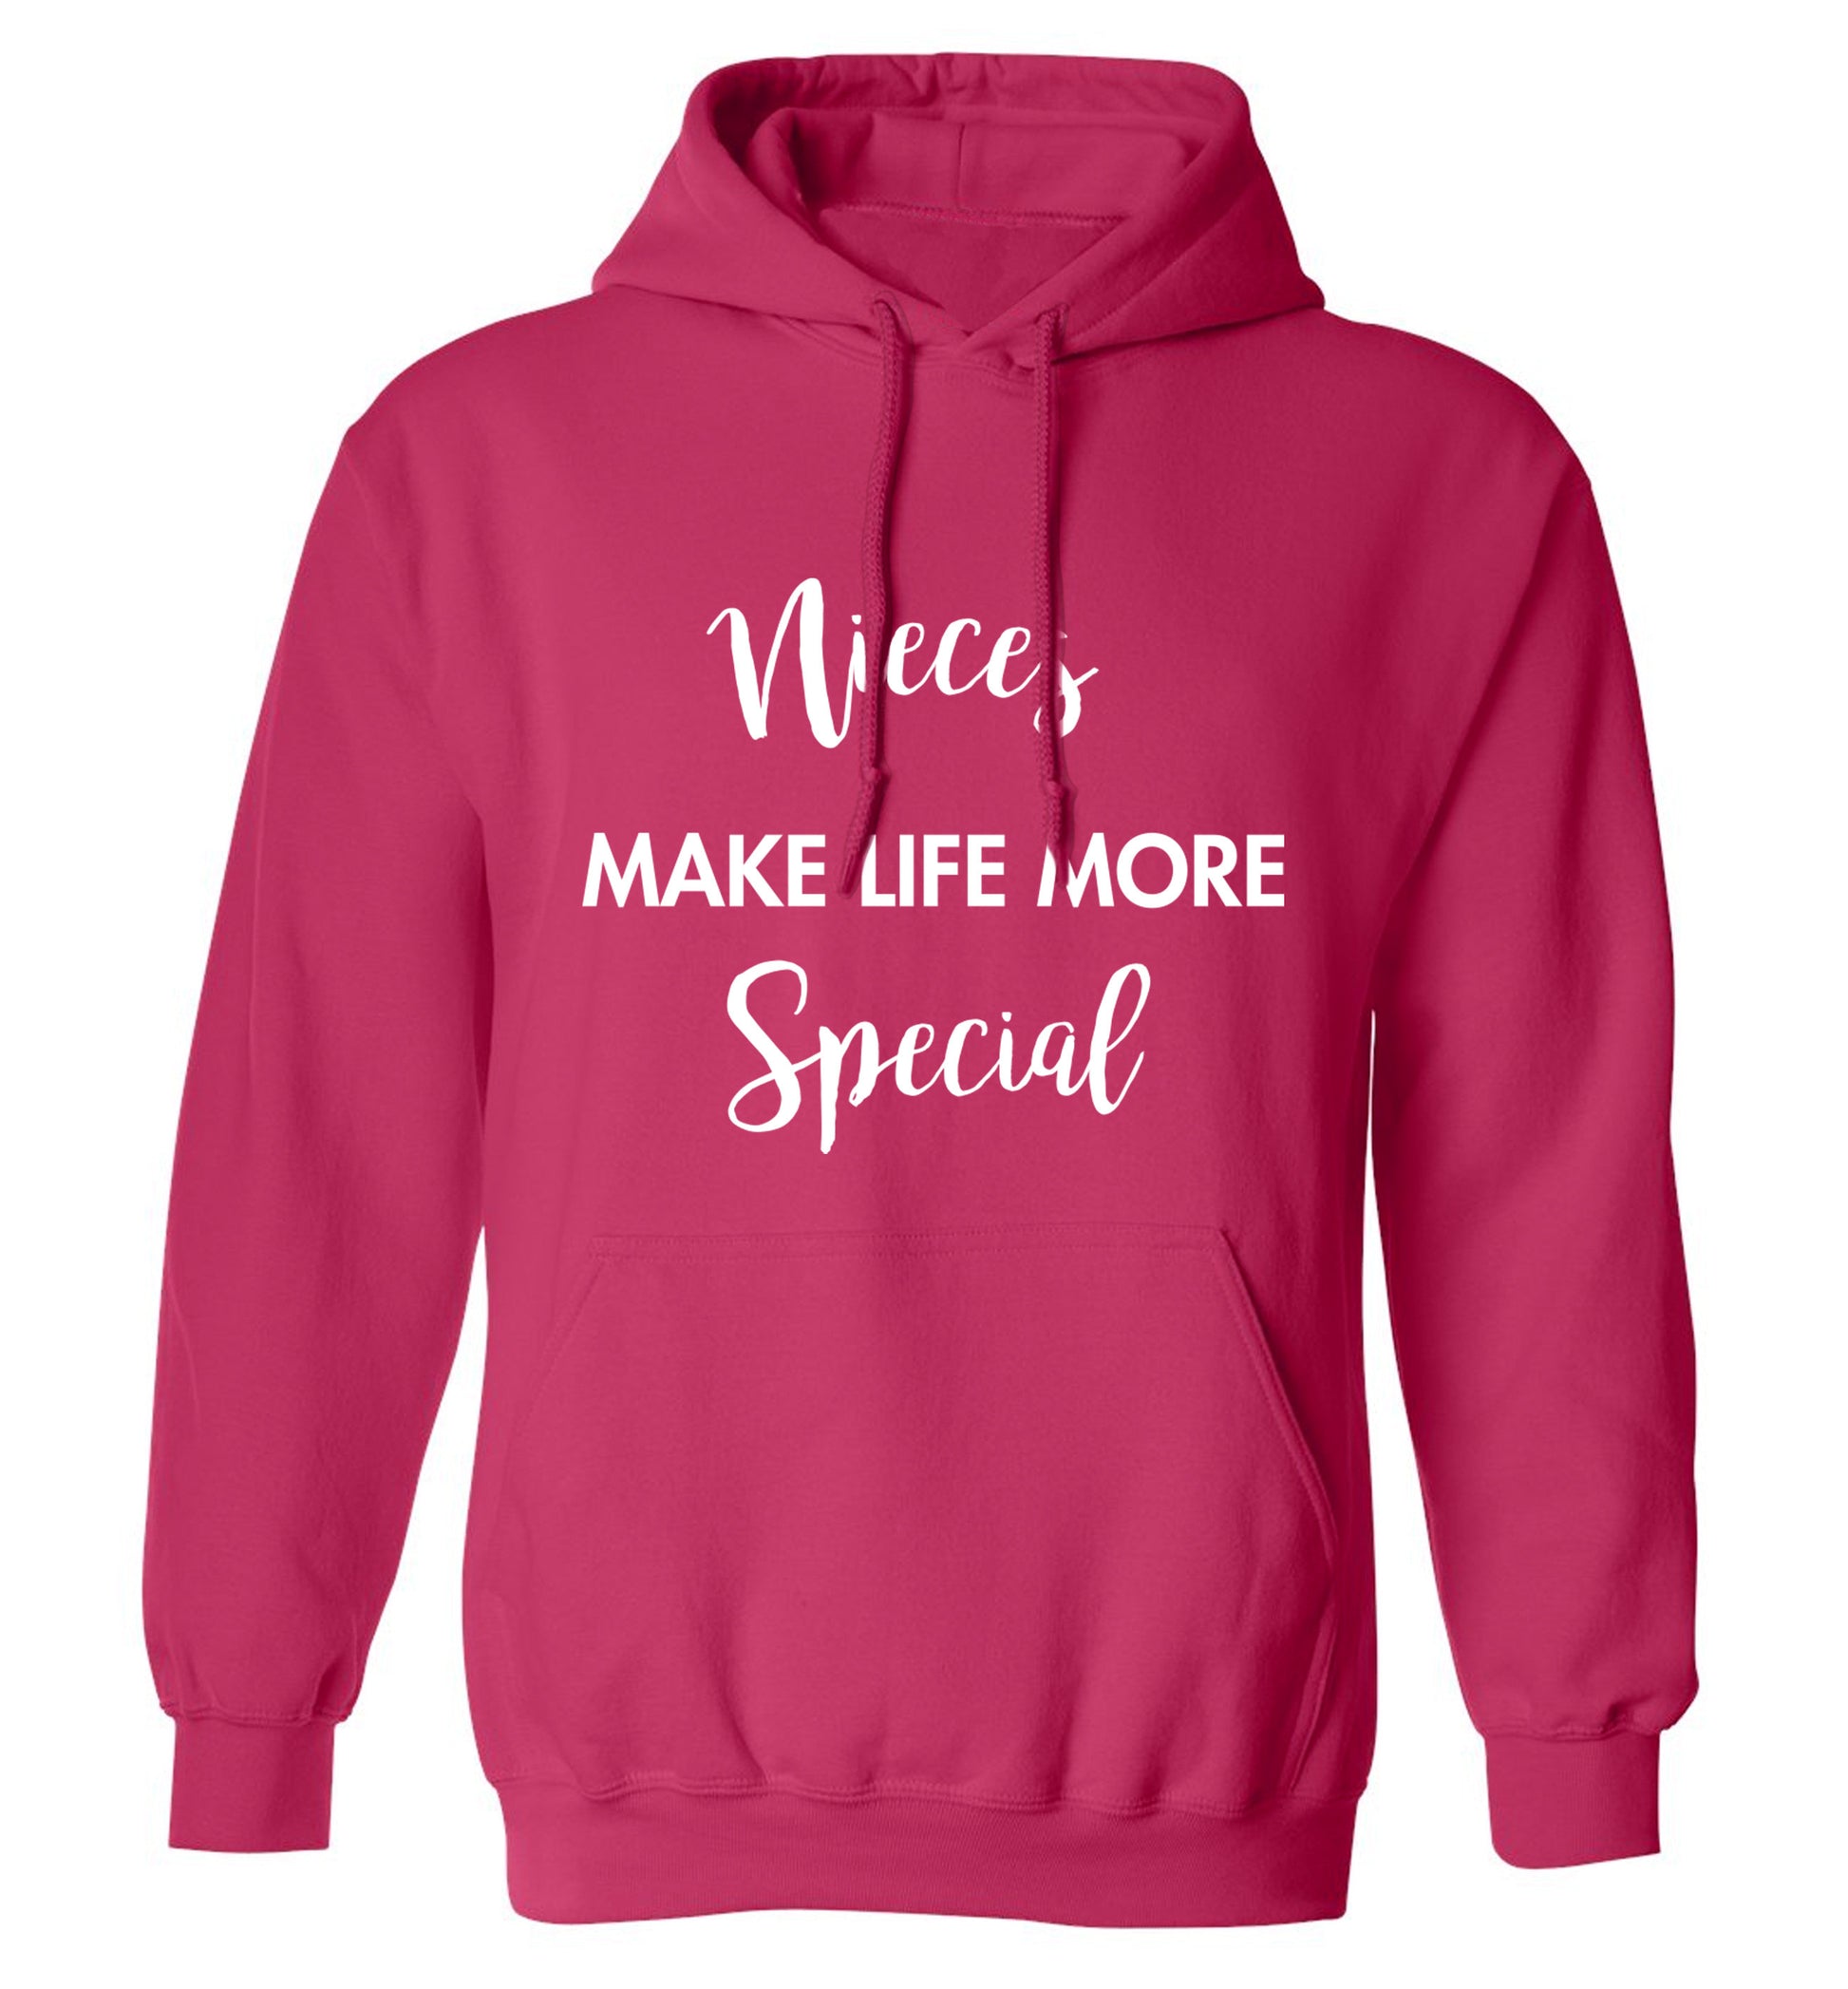 Nieces make life more special adults unisex pink hoodie 2XL